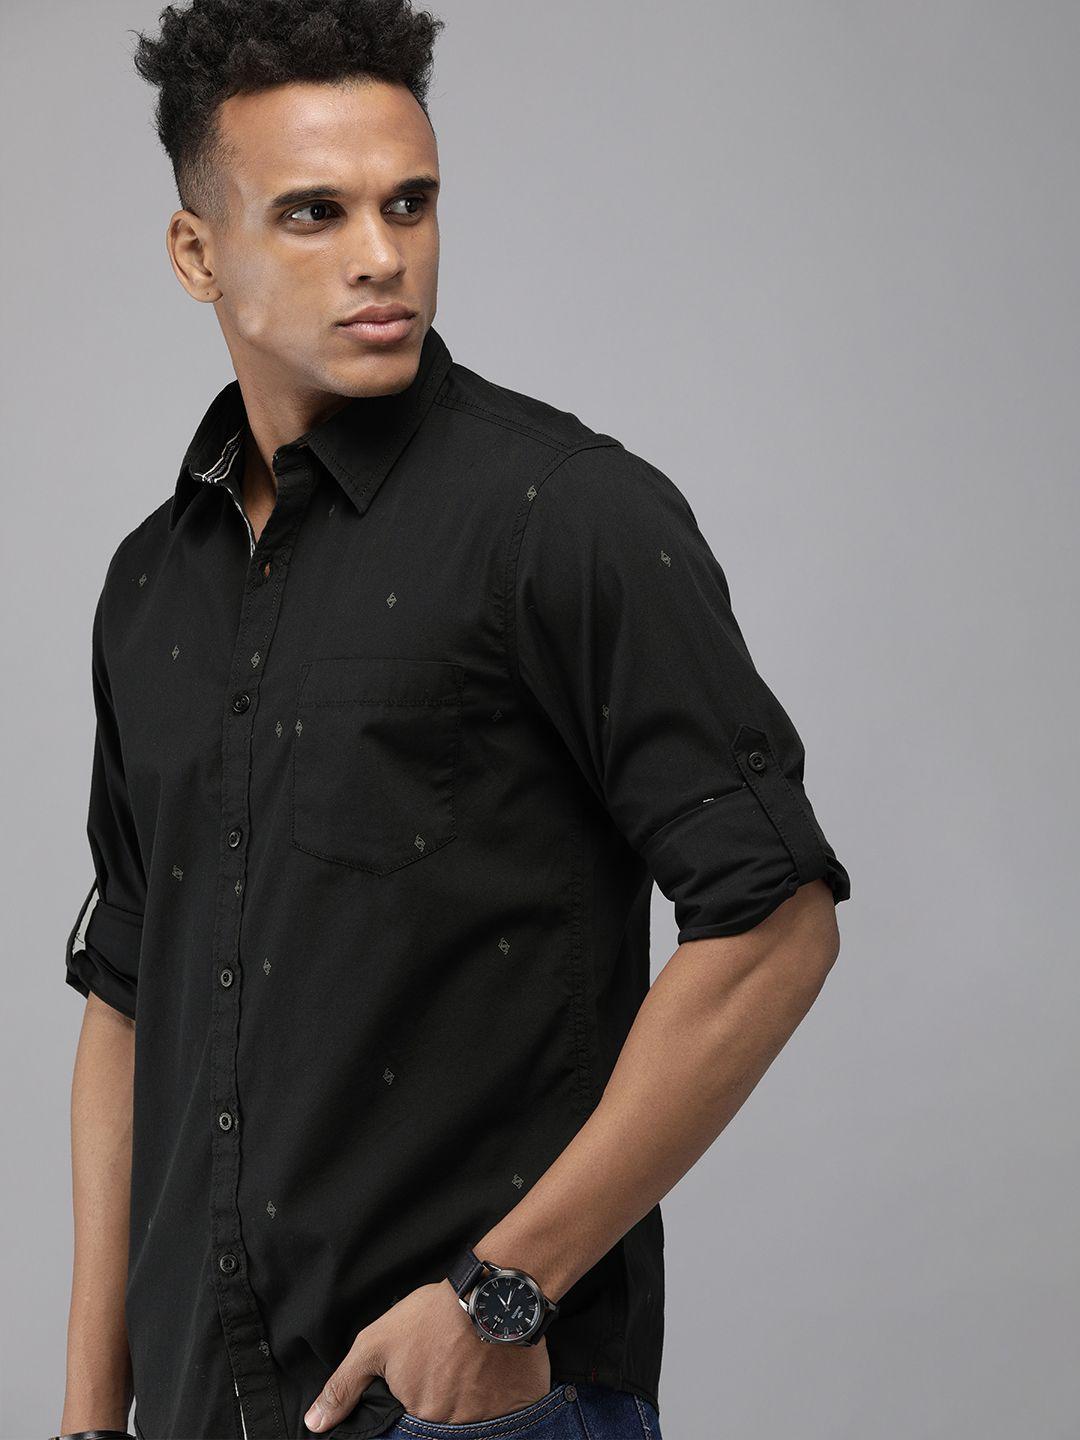 the roadster lifestyle co men black & white printed casual shirt